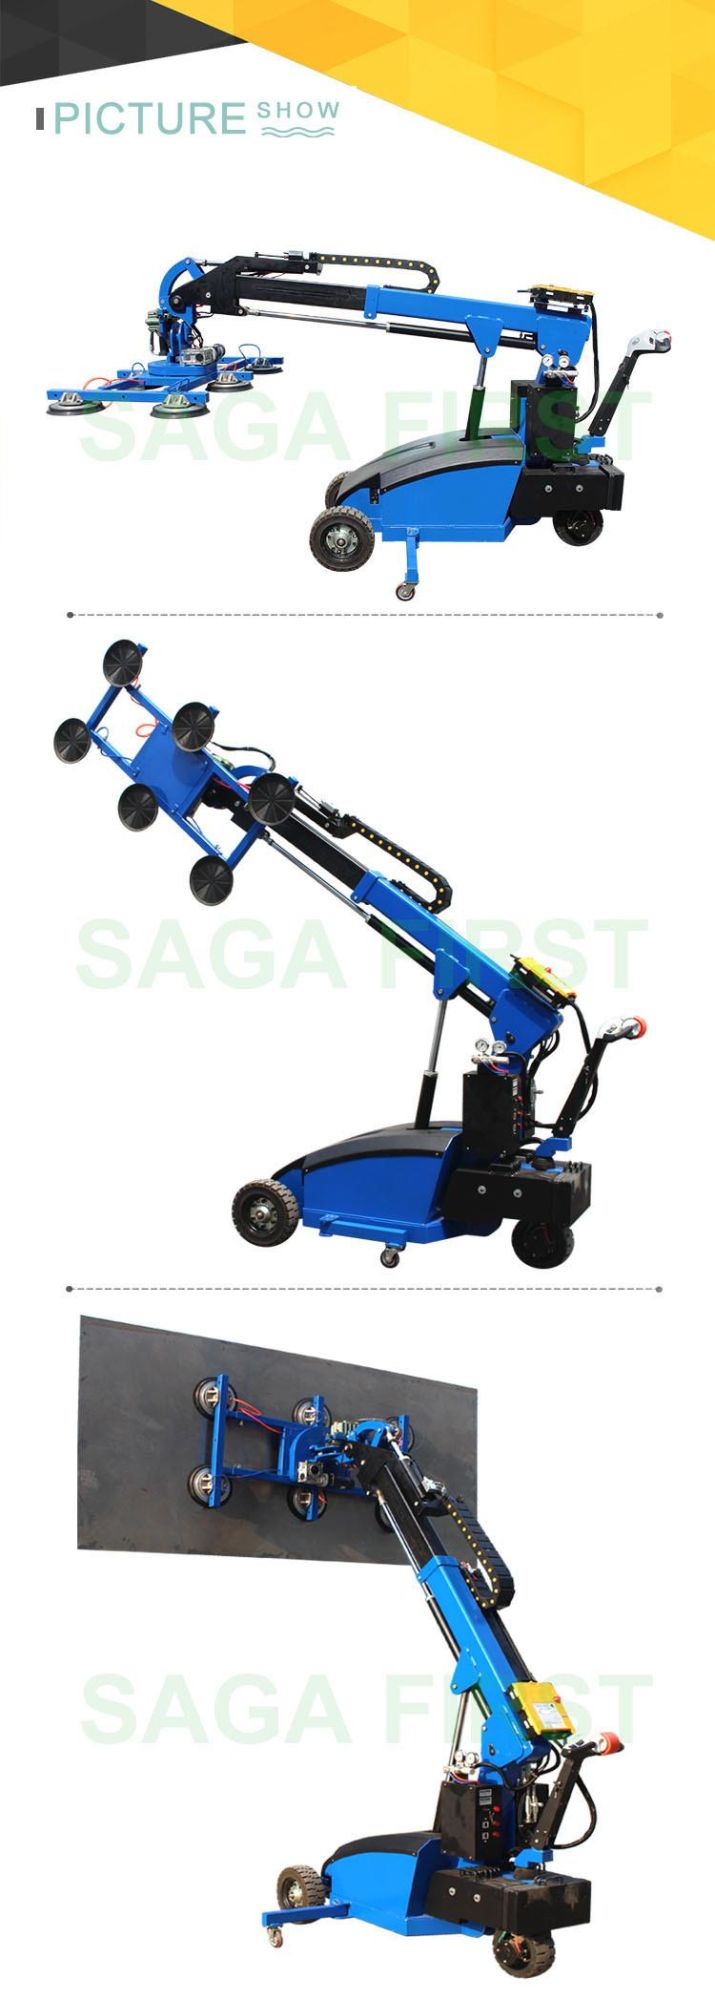 Electric Moving Wall Vacuum Lifter Devices to Install Glass